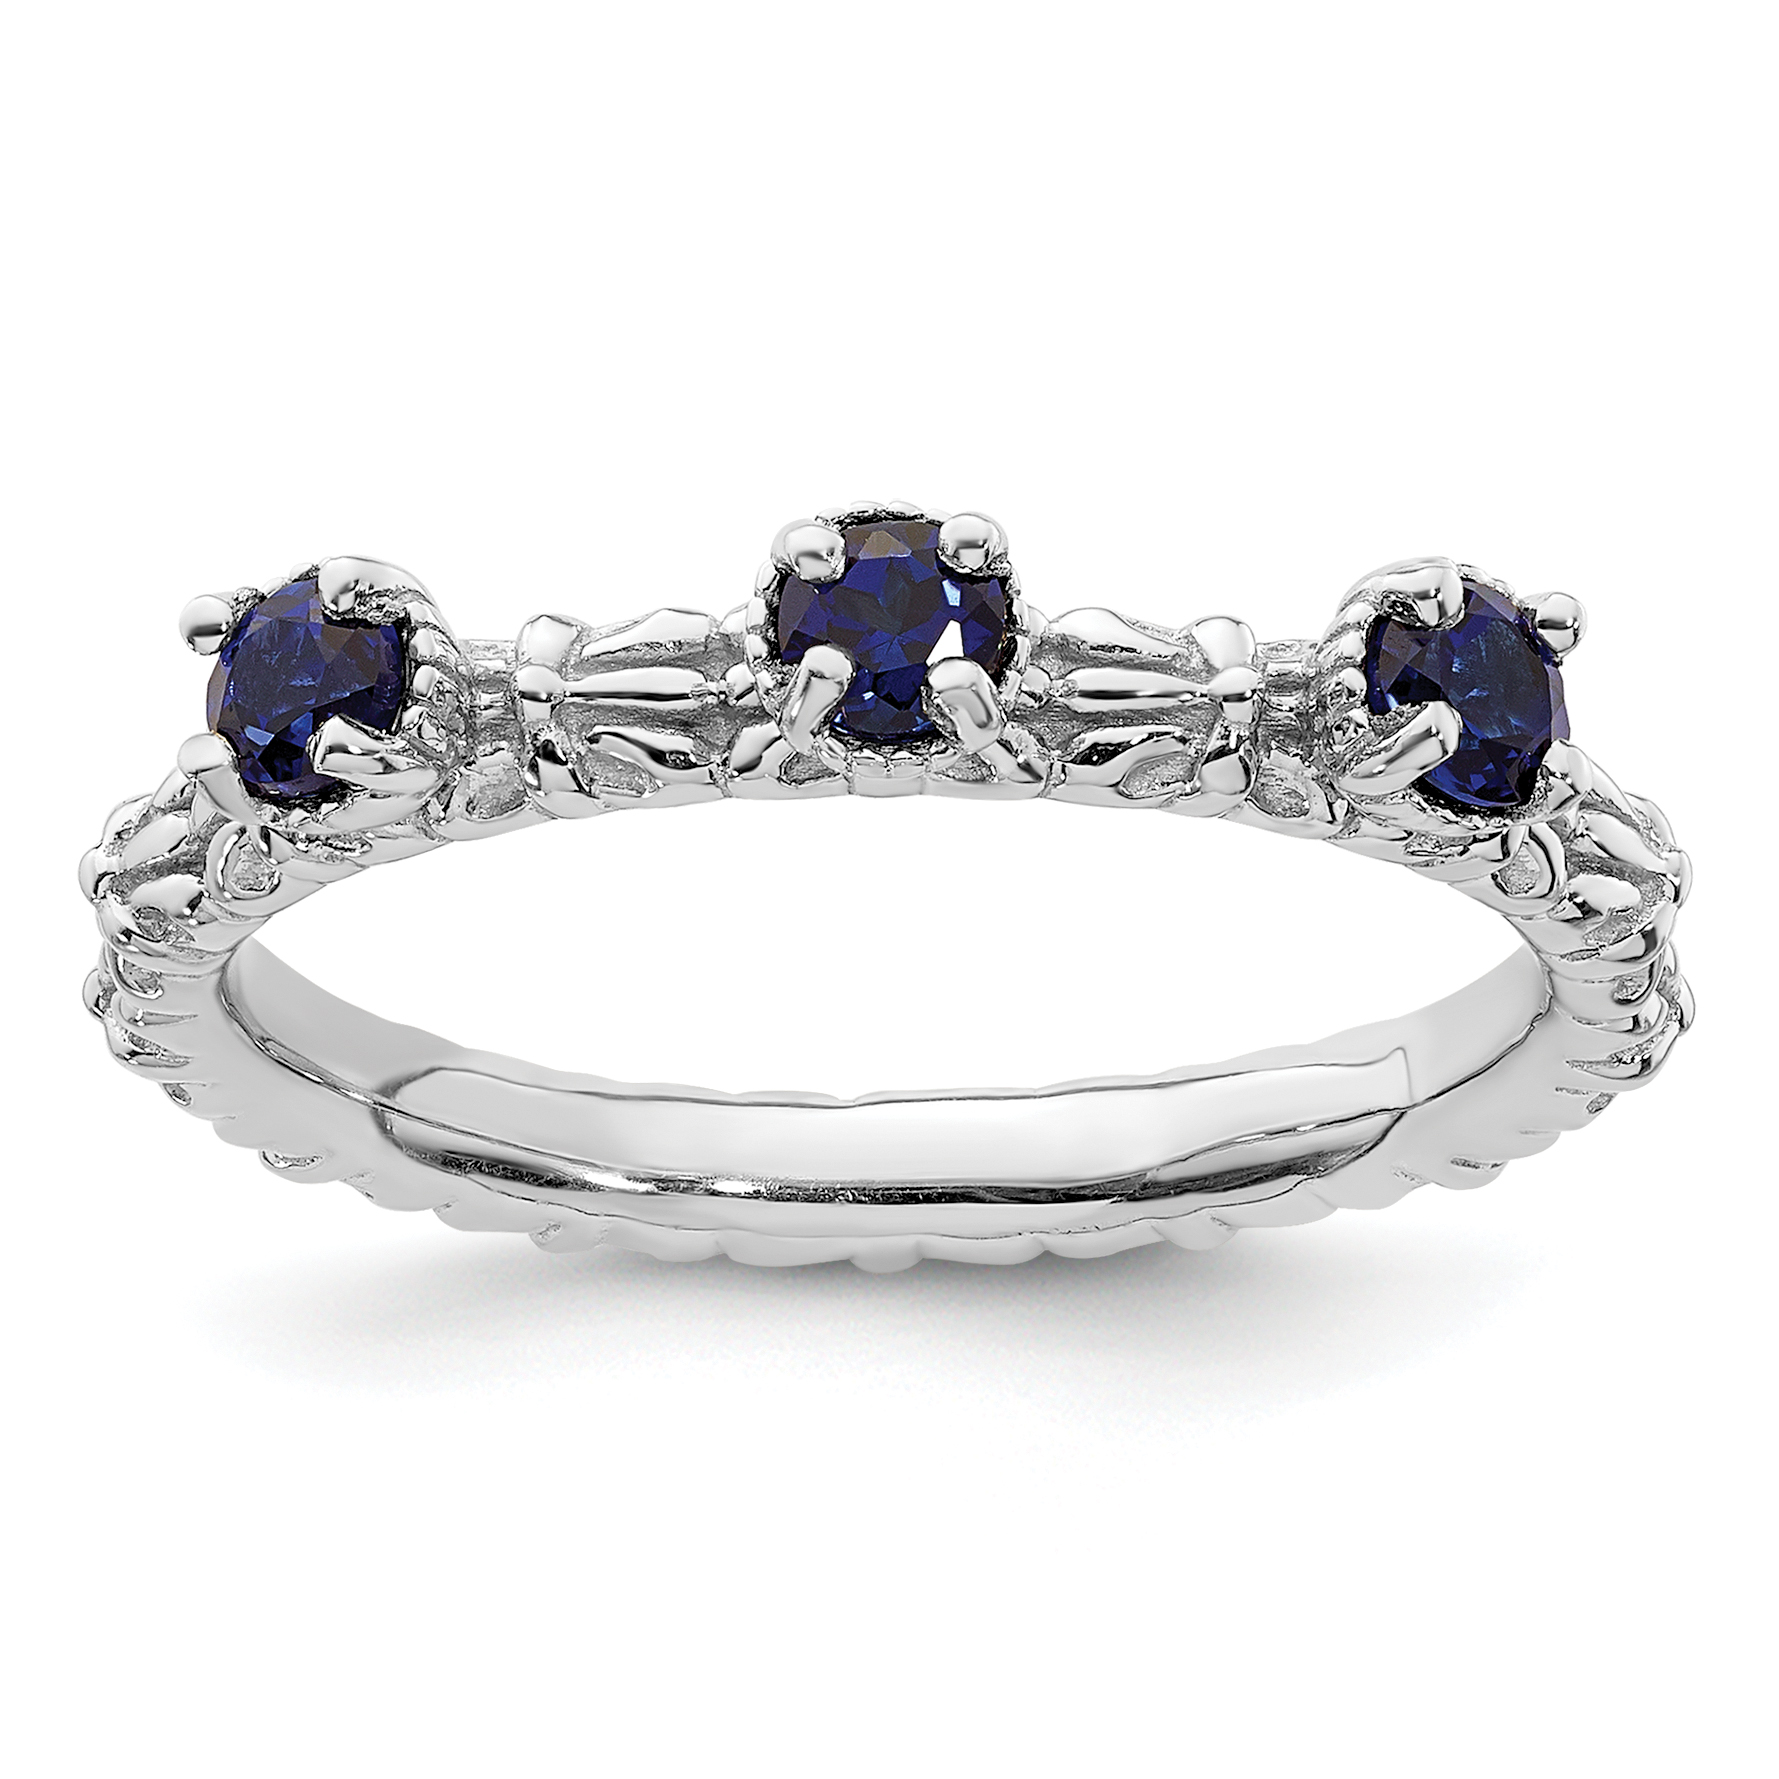 Stackable Expressions Sterling Silver Stackable Expressions Created Sapphire Three Stone Ring